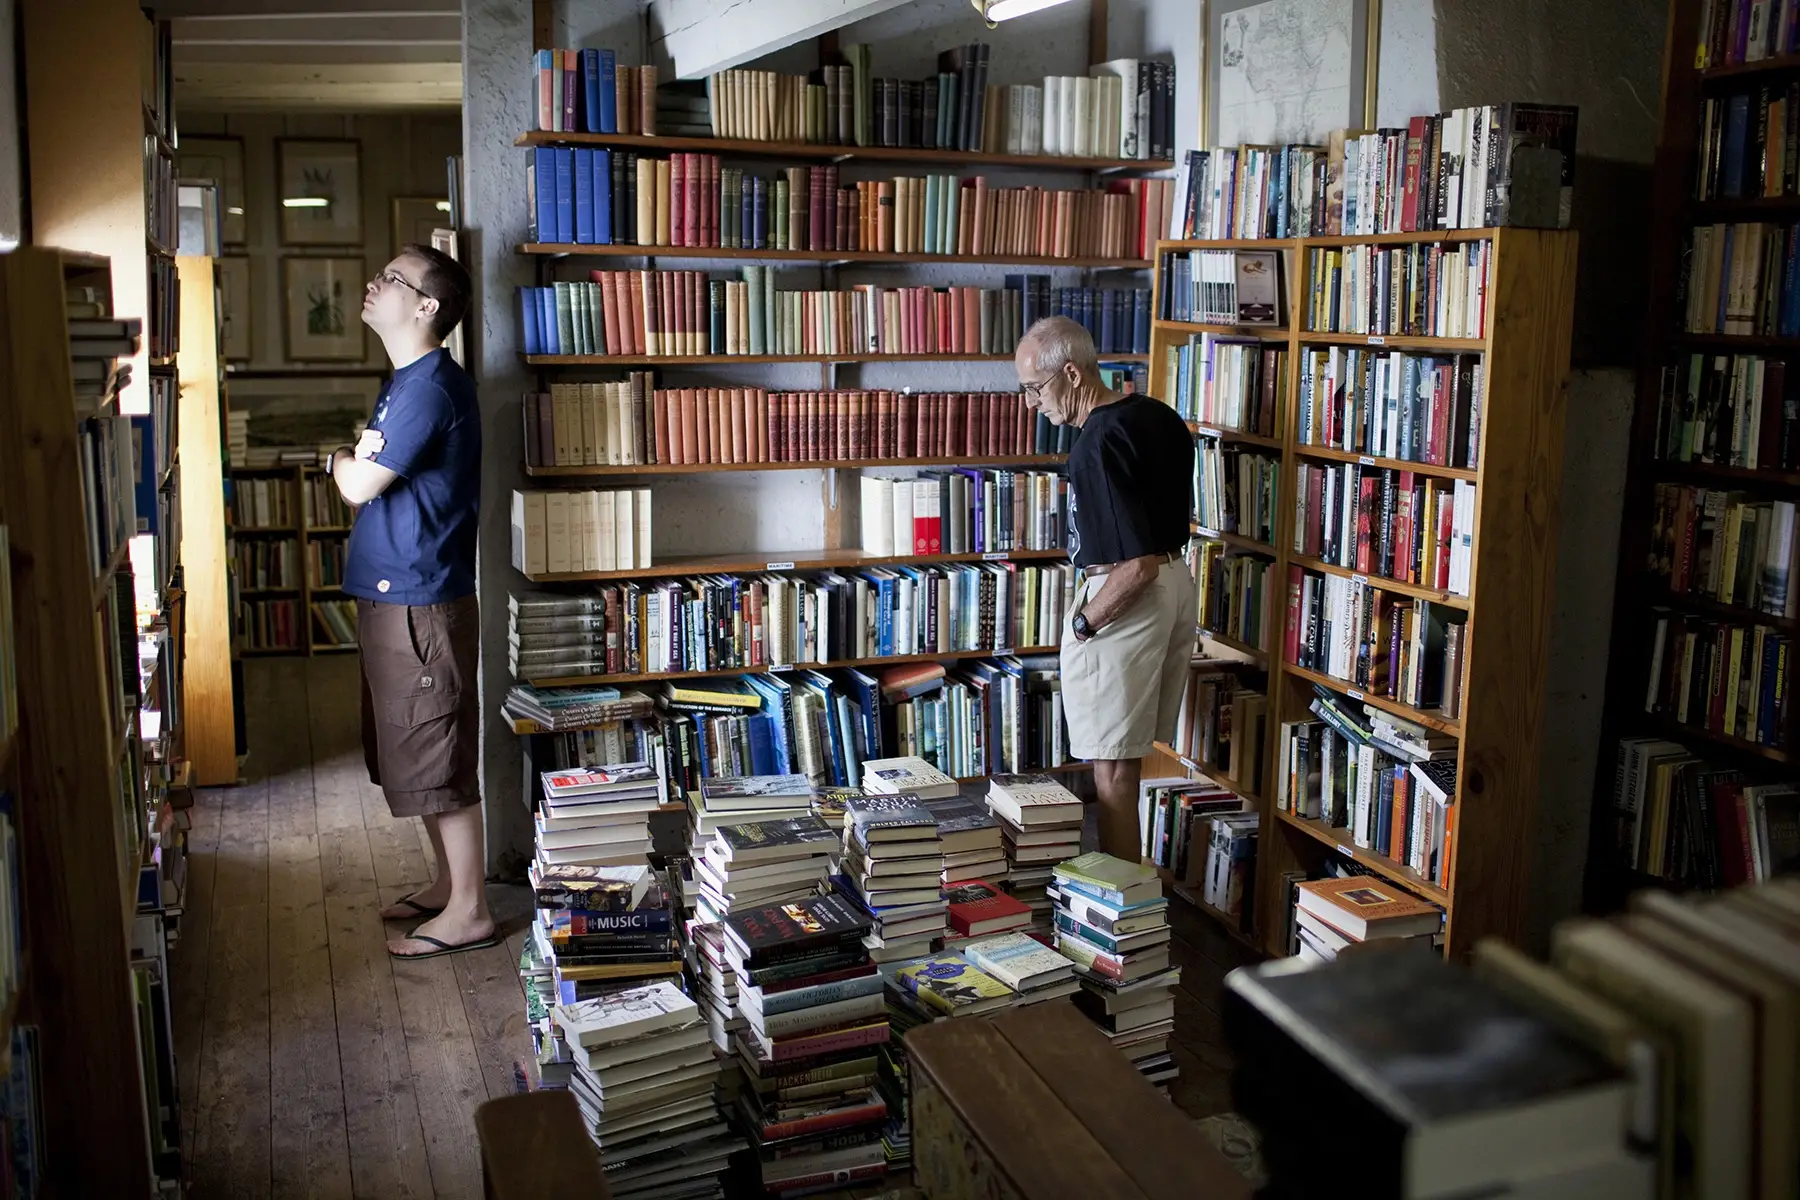 Customers looking for books at Bikini Beach Books, a well-known second-hand book shop in Gordon's Bay, South Africa